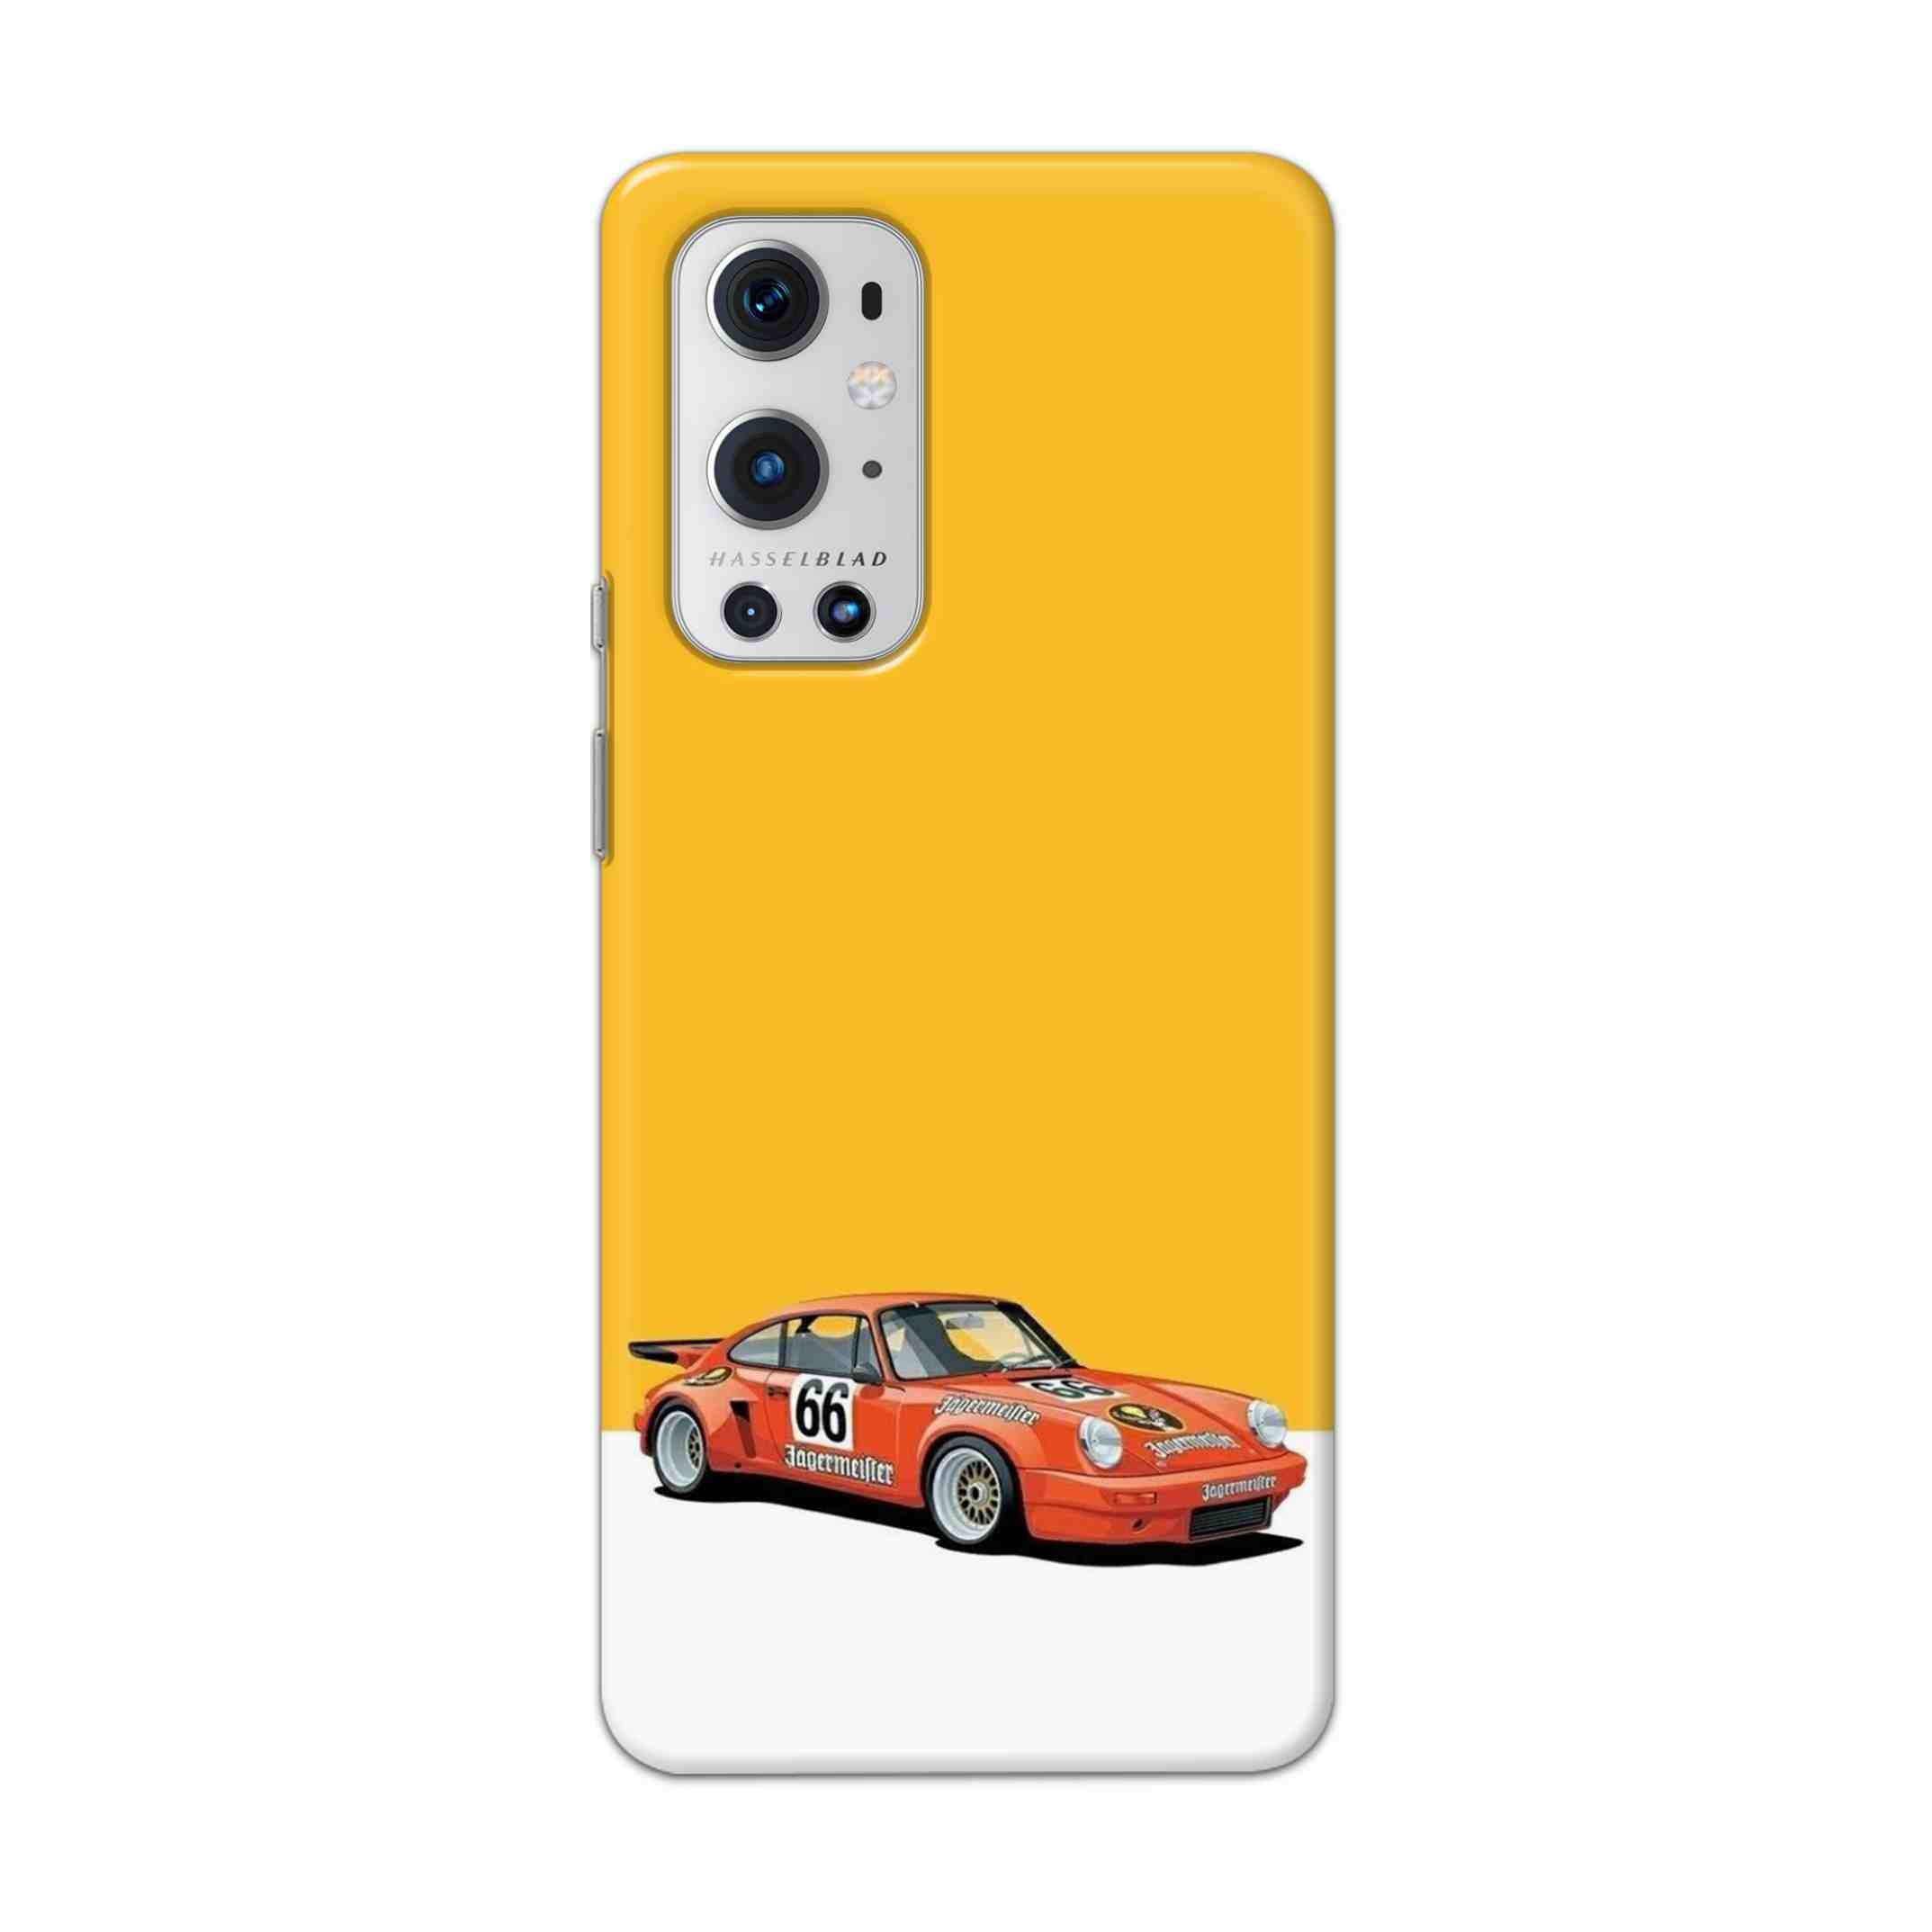 Buy Porche Hard Back Mobile Phone Case Cover For OnePlus 9 Pro Online